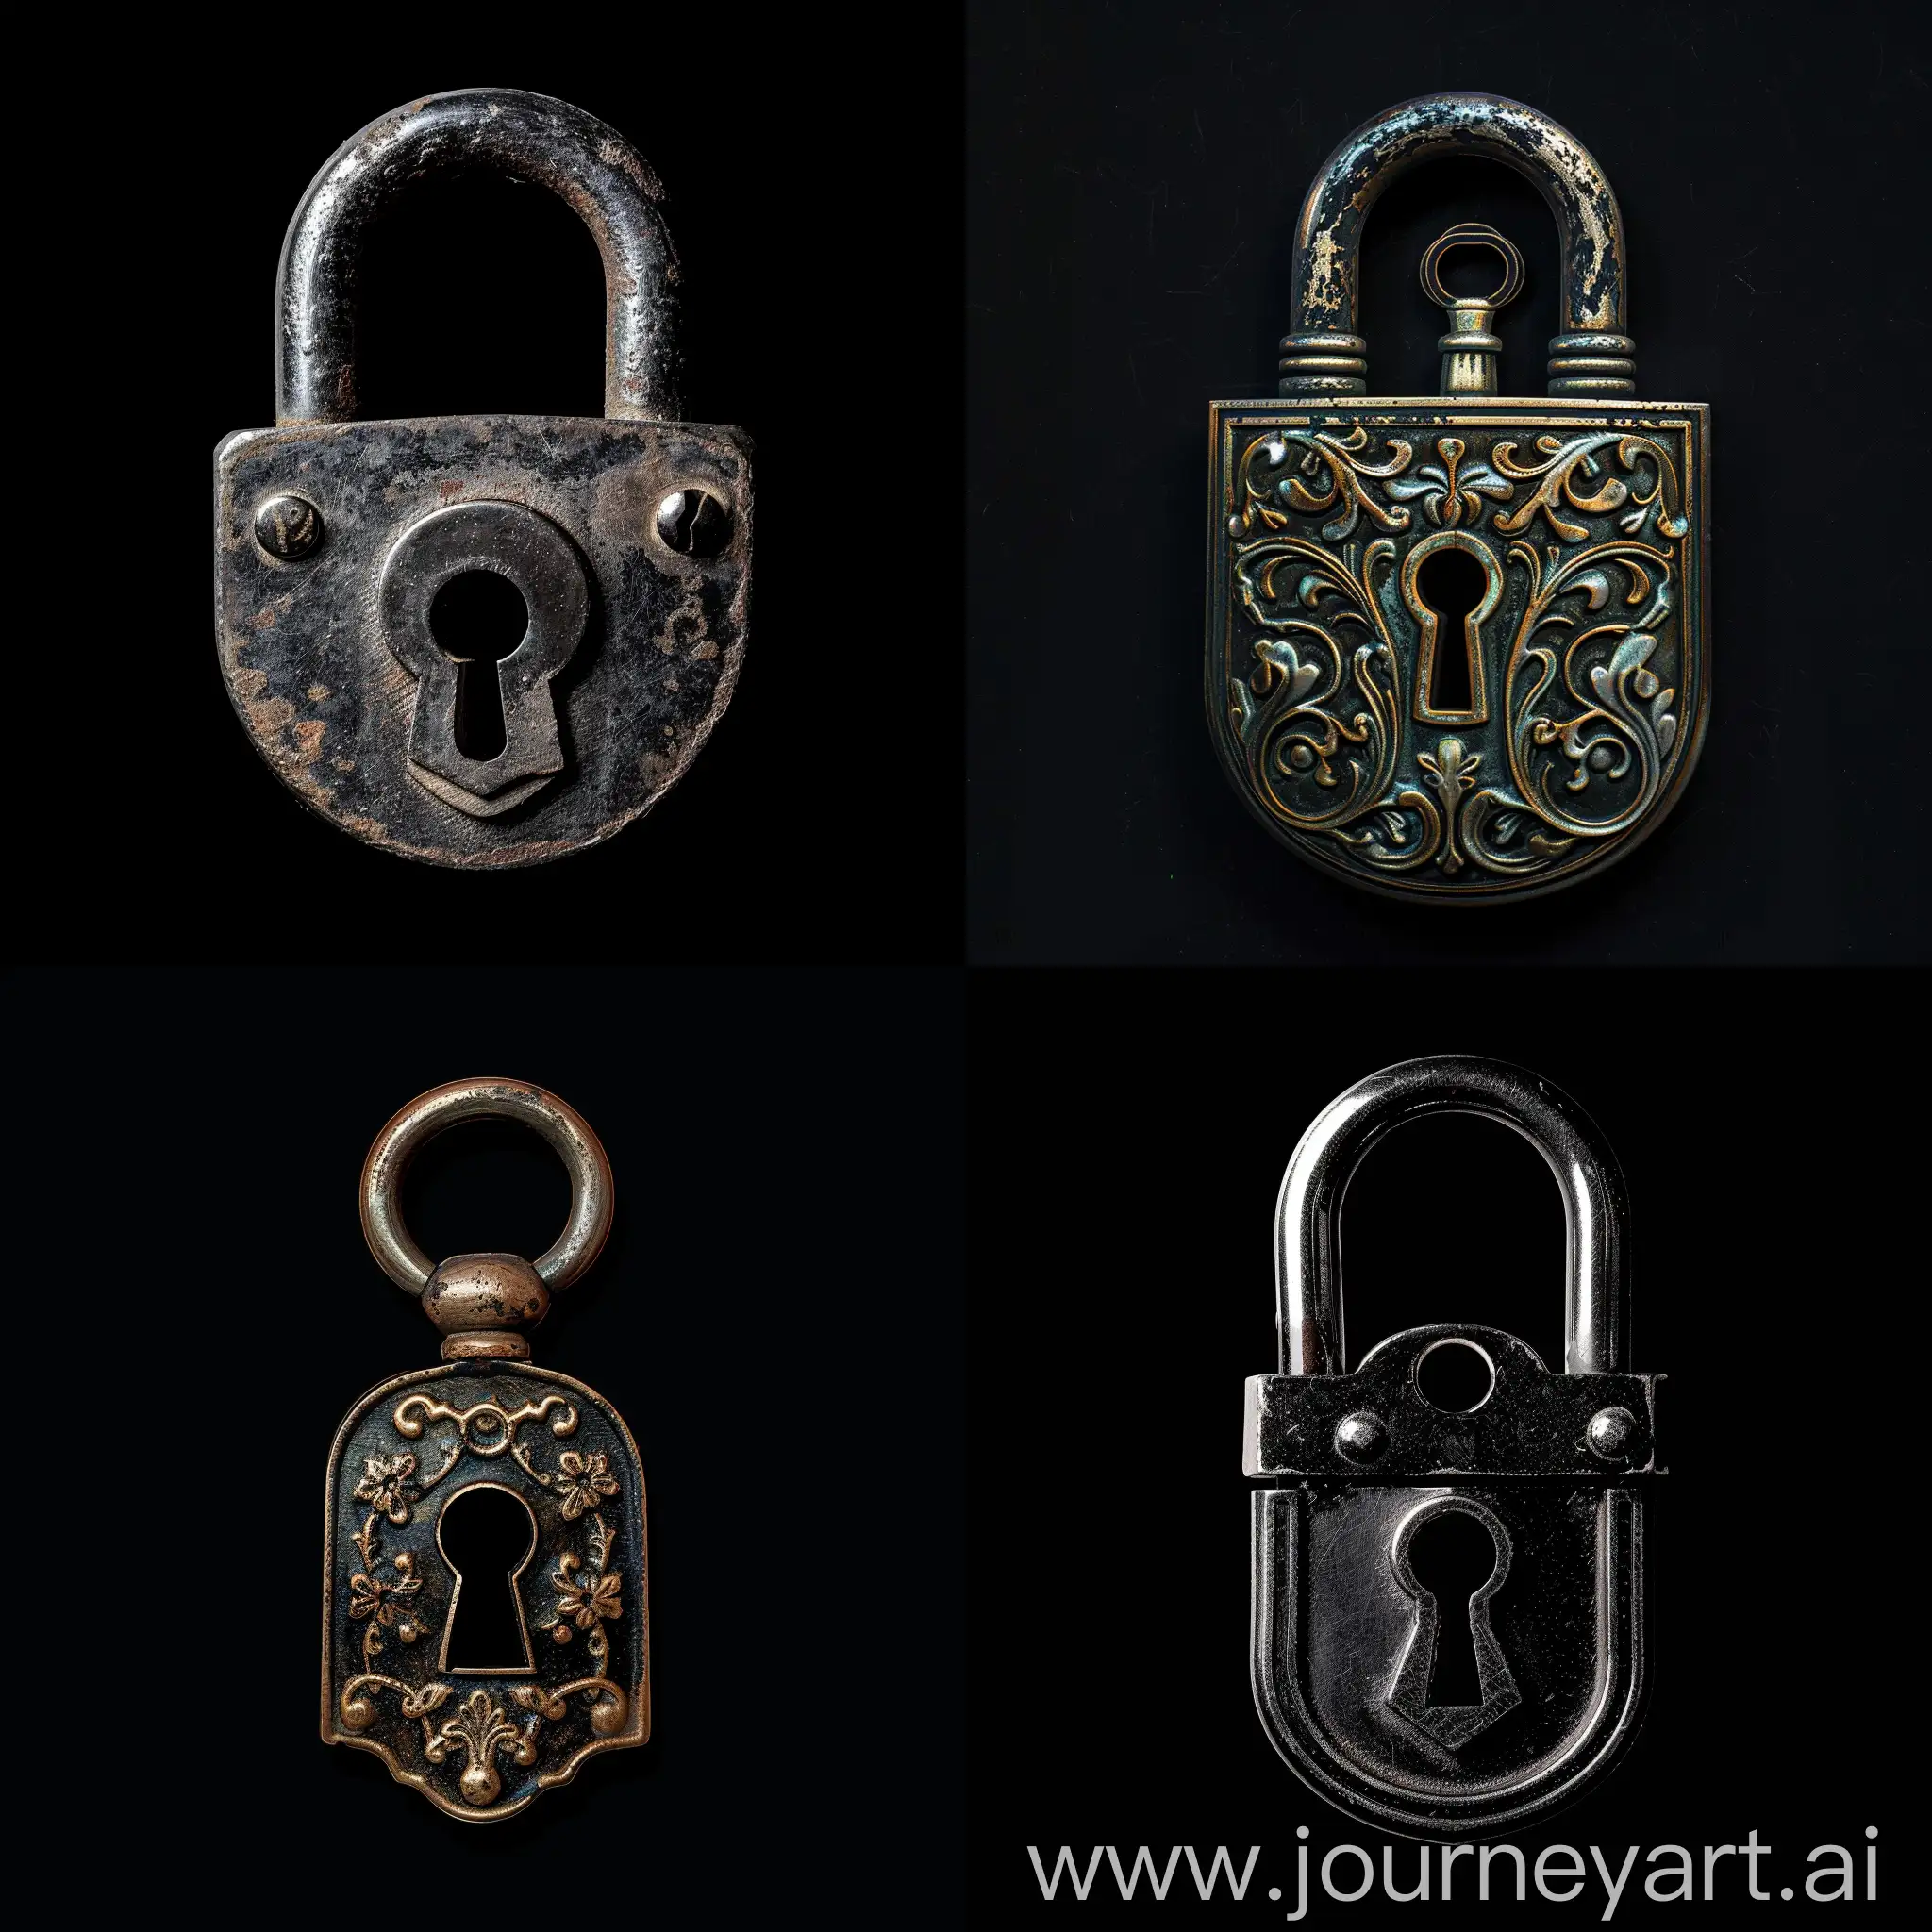 the padlock key is beautiful and very expensive on a completely black background